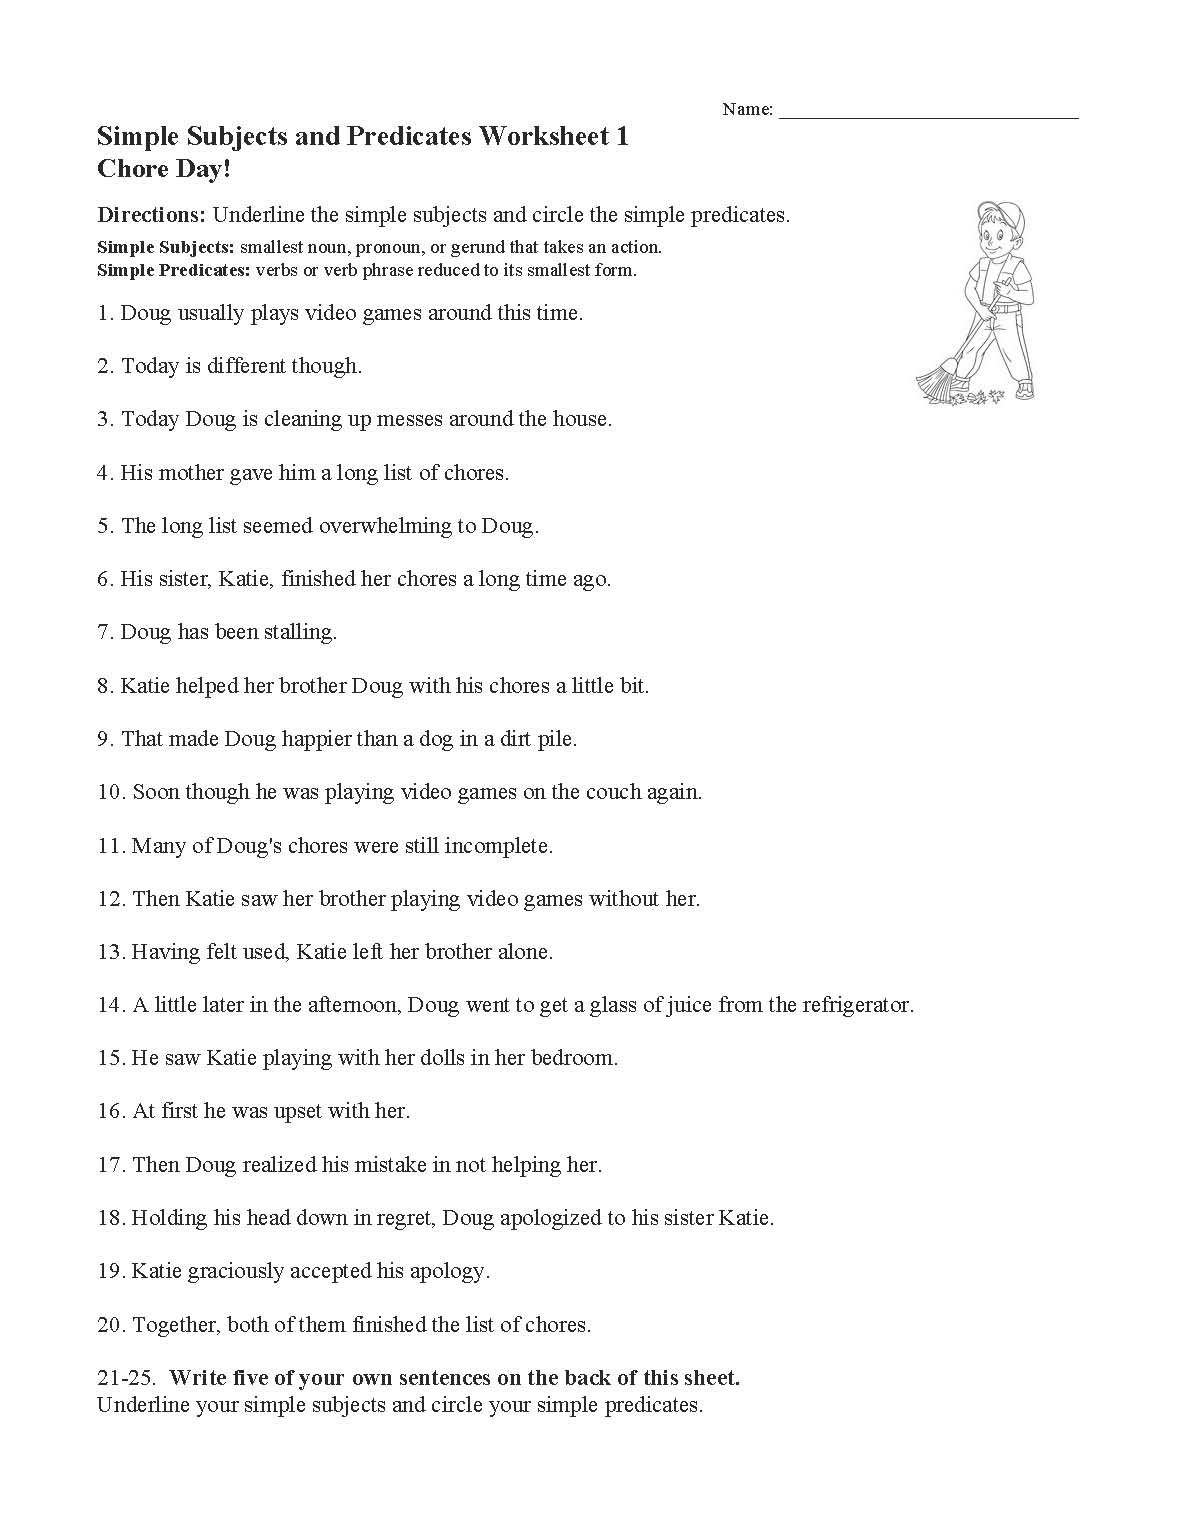 This is a preview image of Simple Subjects and Predicates Worksheet 1 . Click on it to enlarge it or view the source file.